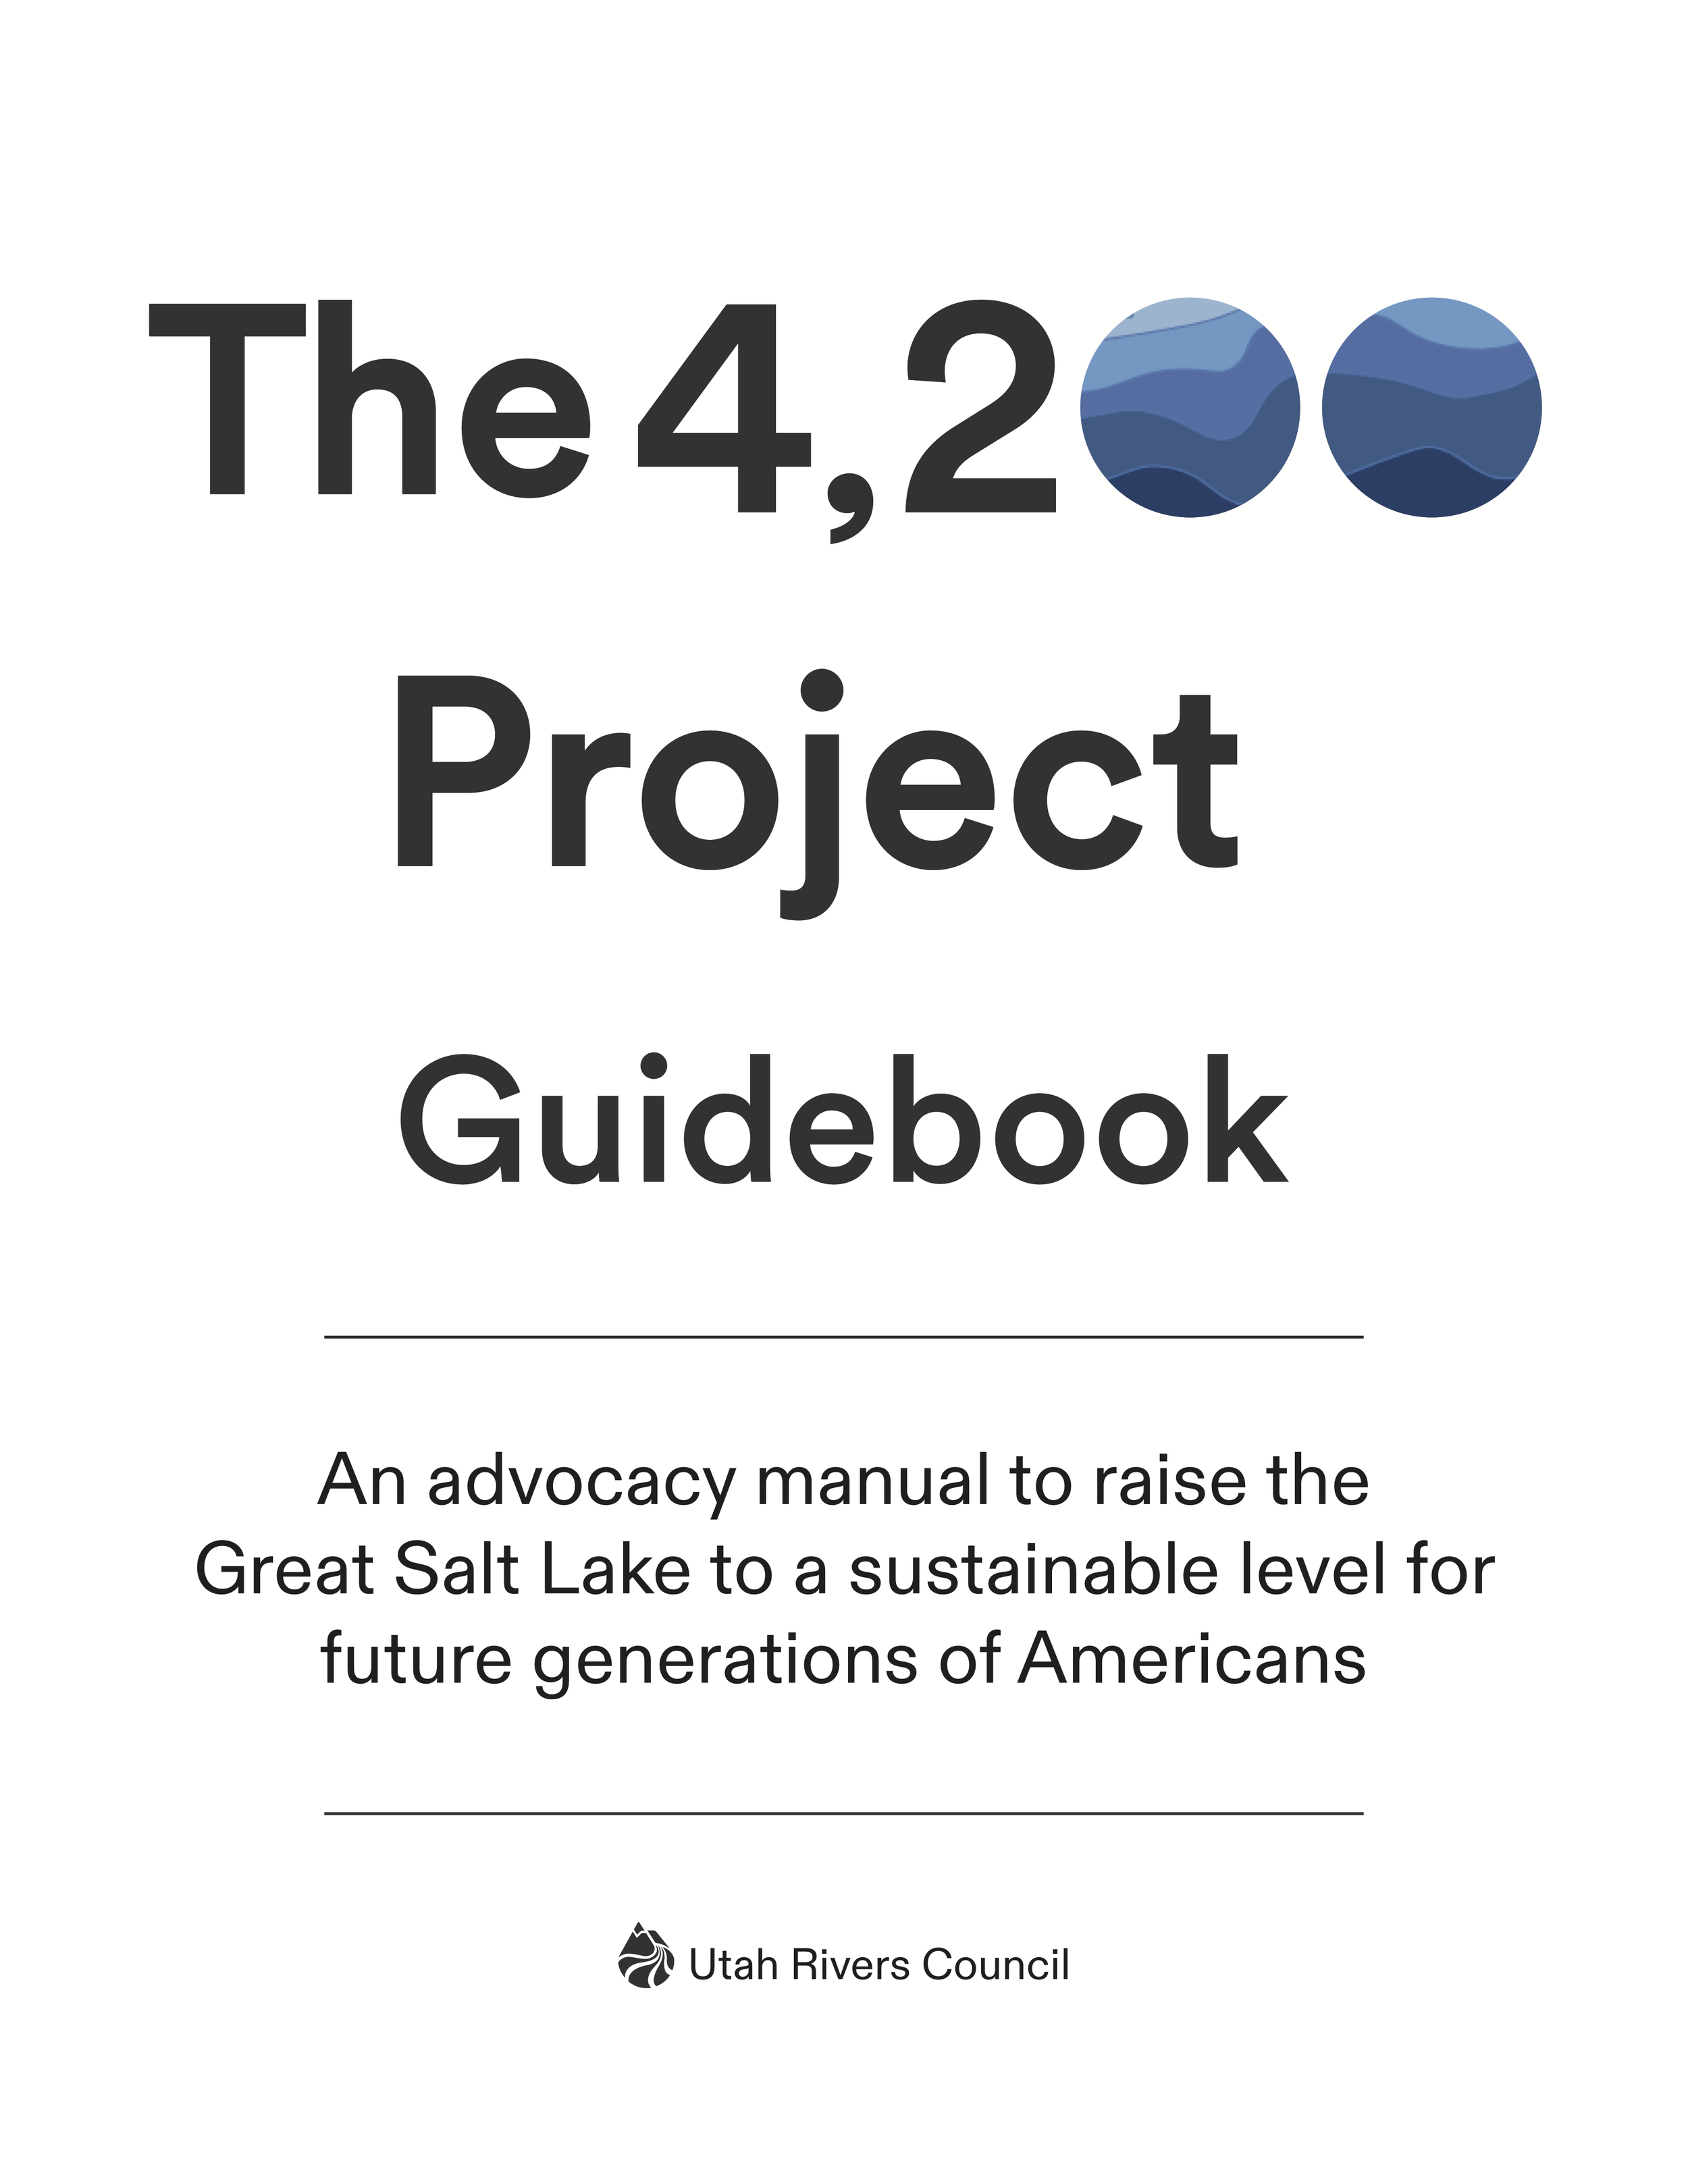 The 4,200 Project Guidebook